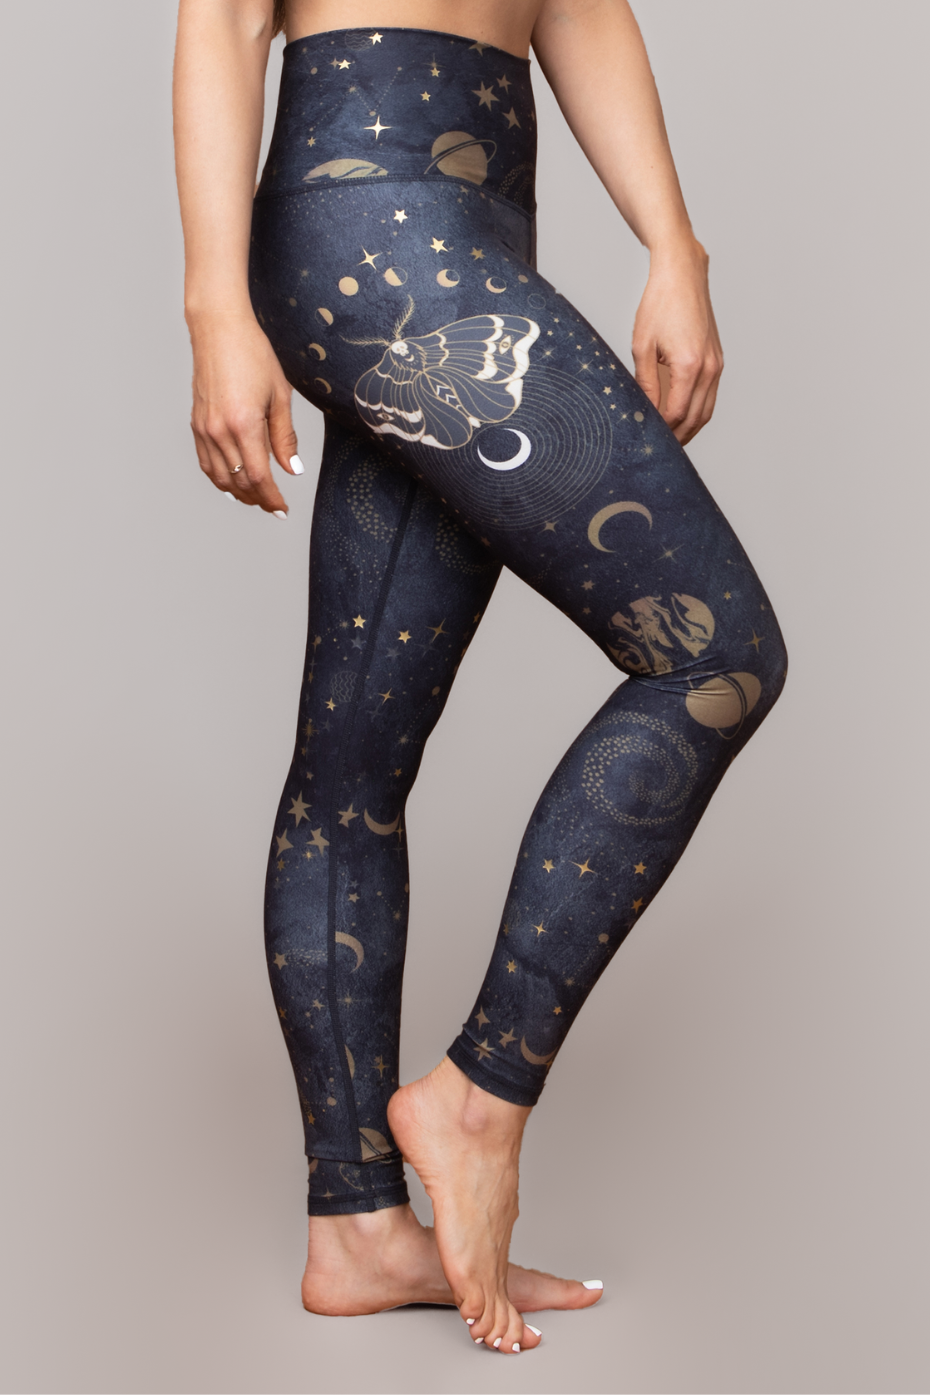 Shroom Galaxy Barefoot Legging with Gold Foil